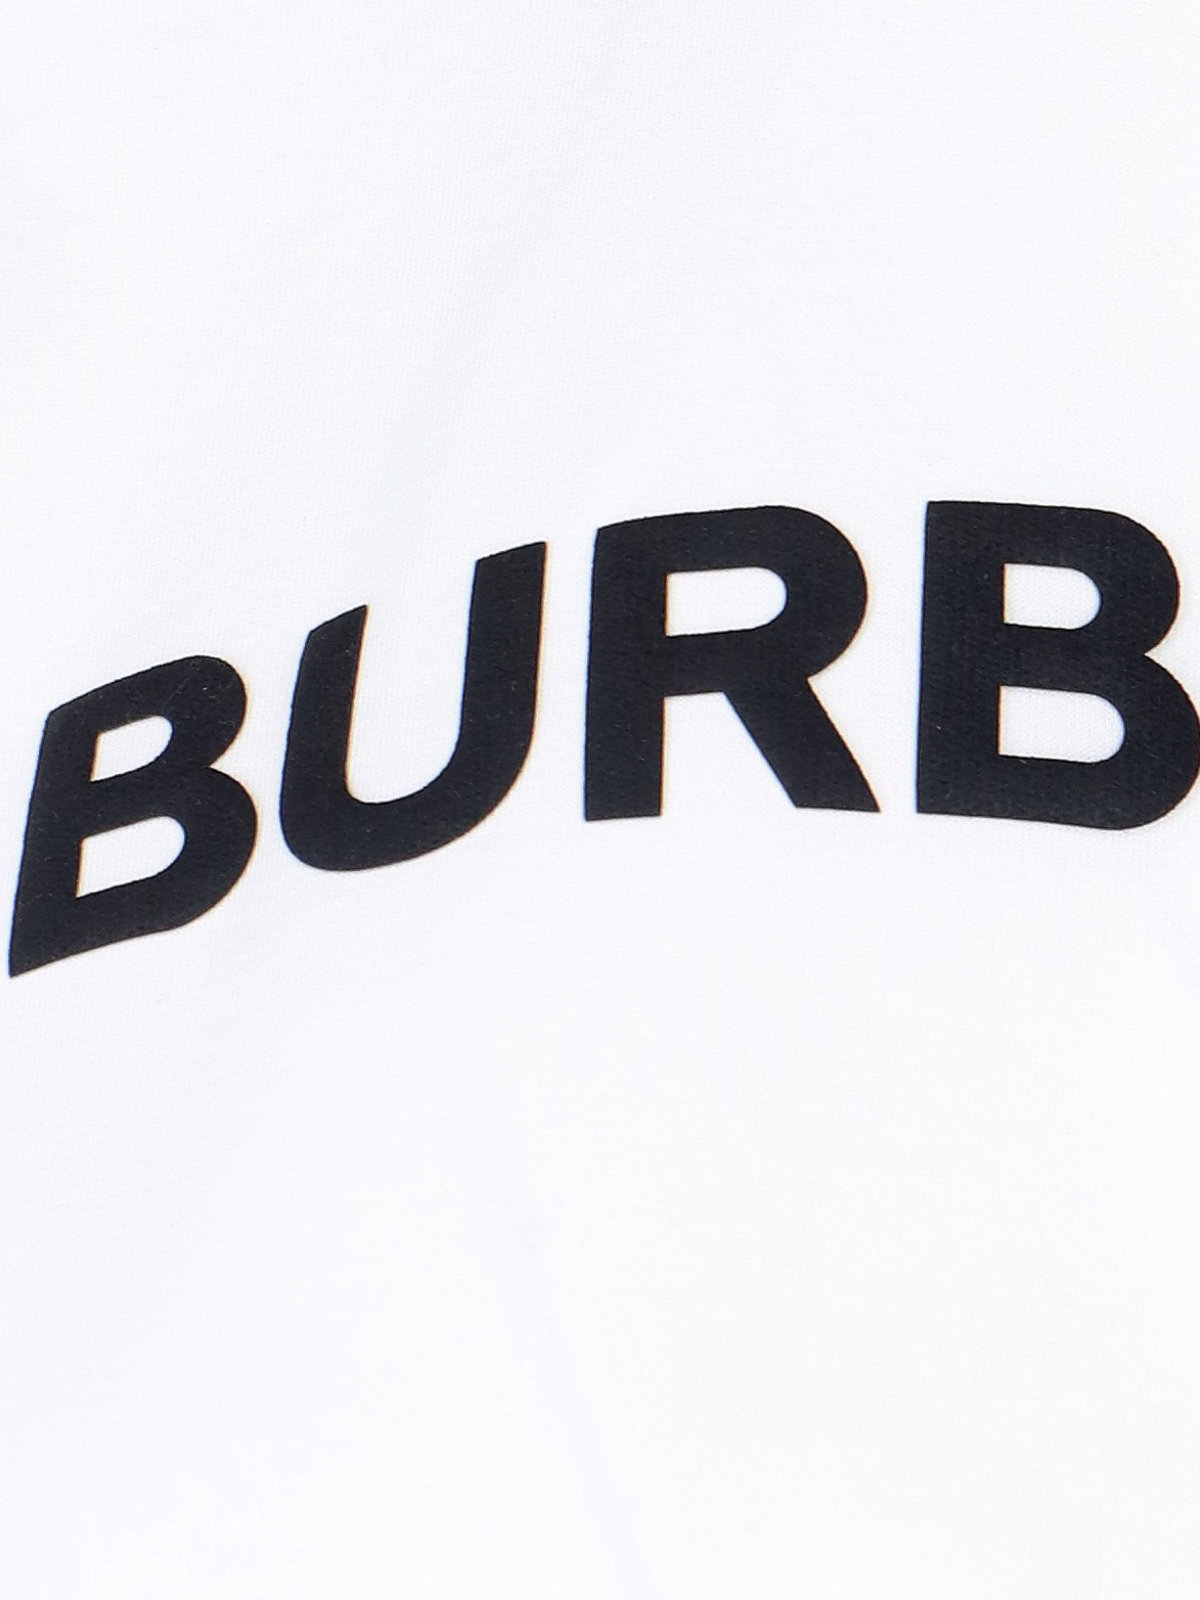 T shirts Burberry   Logo T shirt      Shop online at THEBS